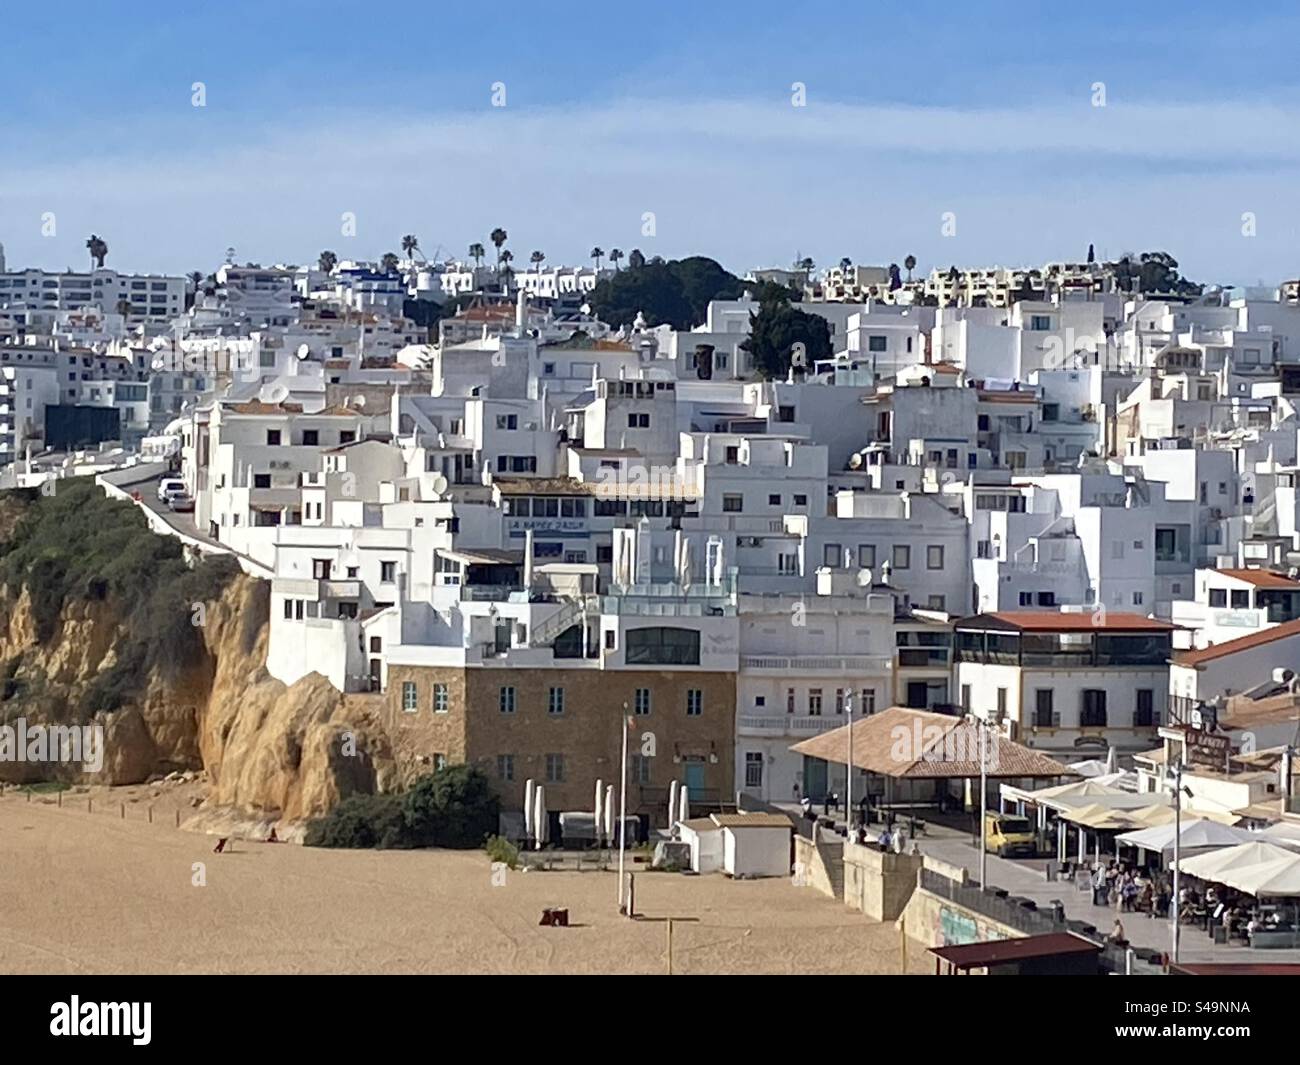 All the bright white washed buildings in the town of Albufeira in Portugal. Stock Photo